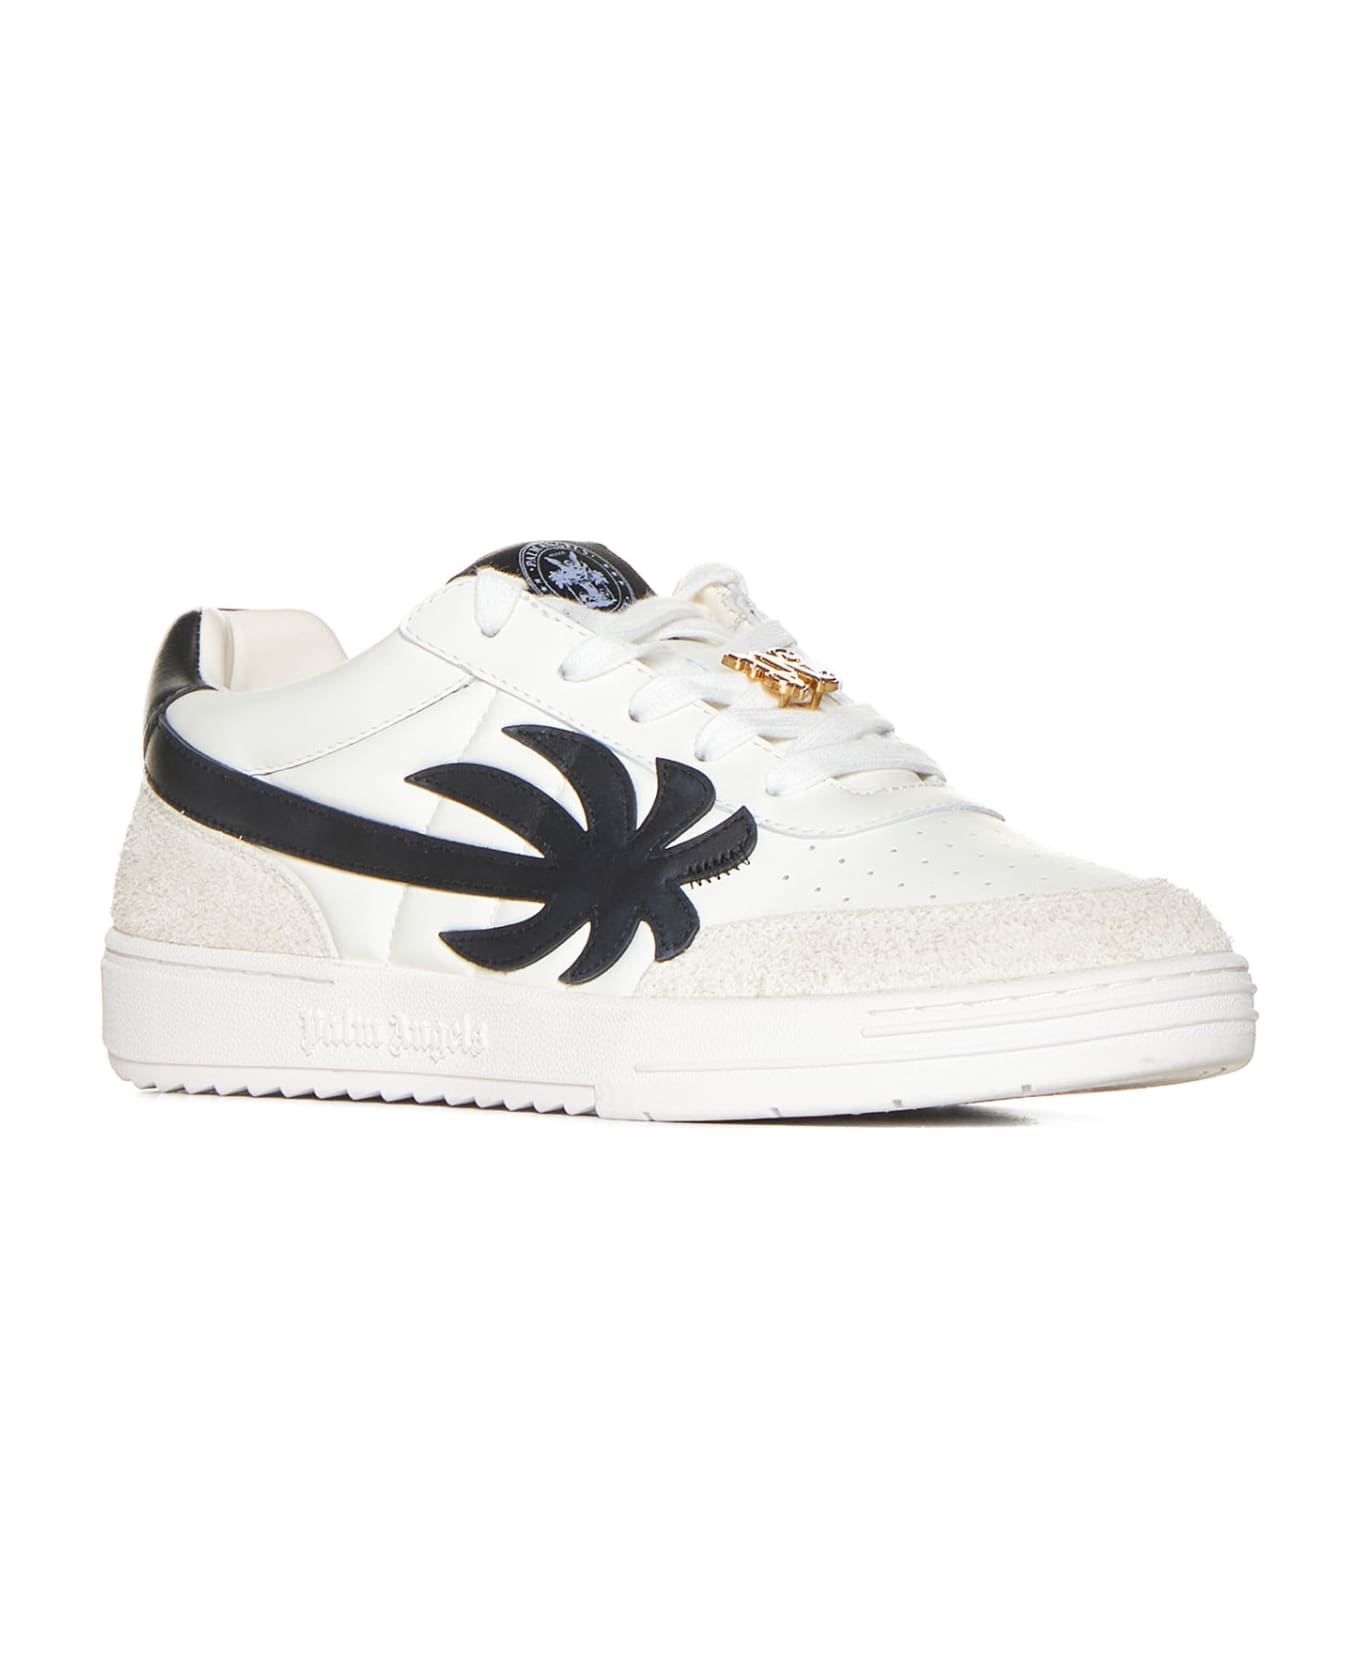 Palm Angels 'palm Beach University' White Leather Sneakers - White BLACK